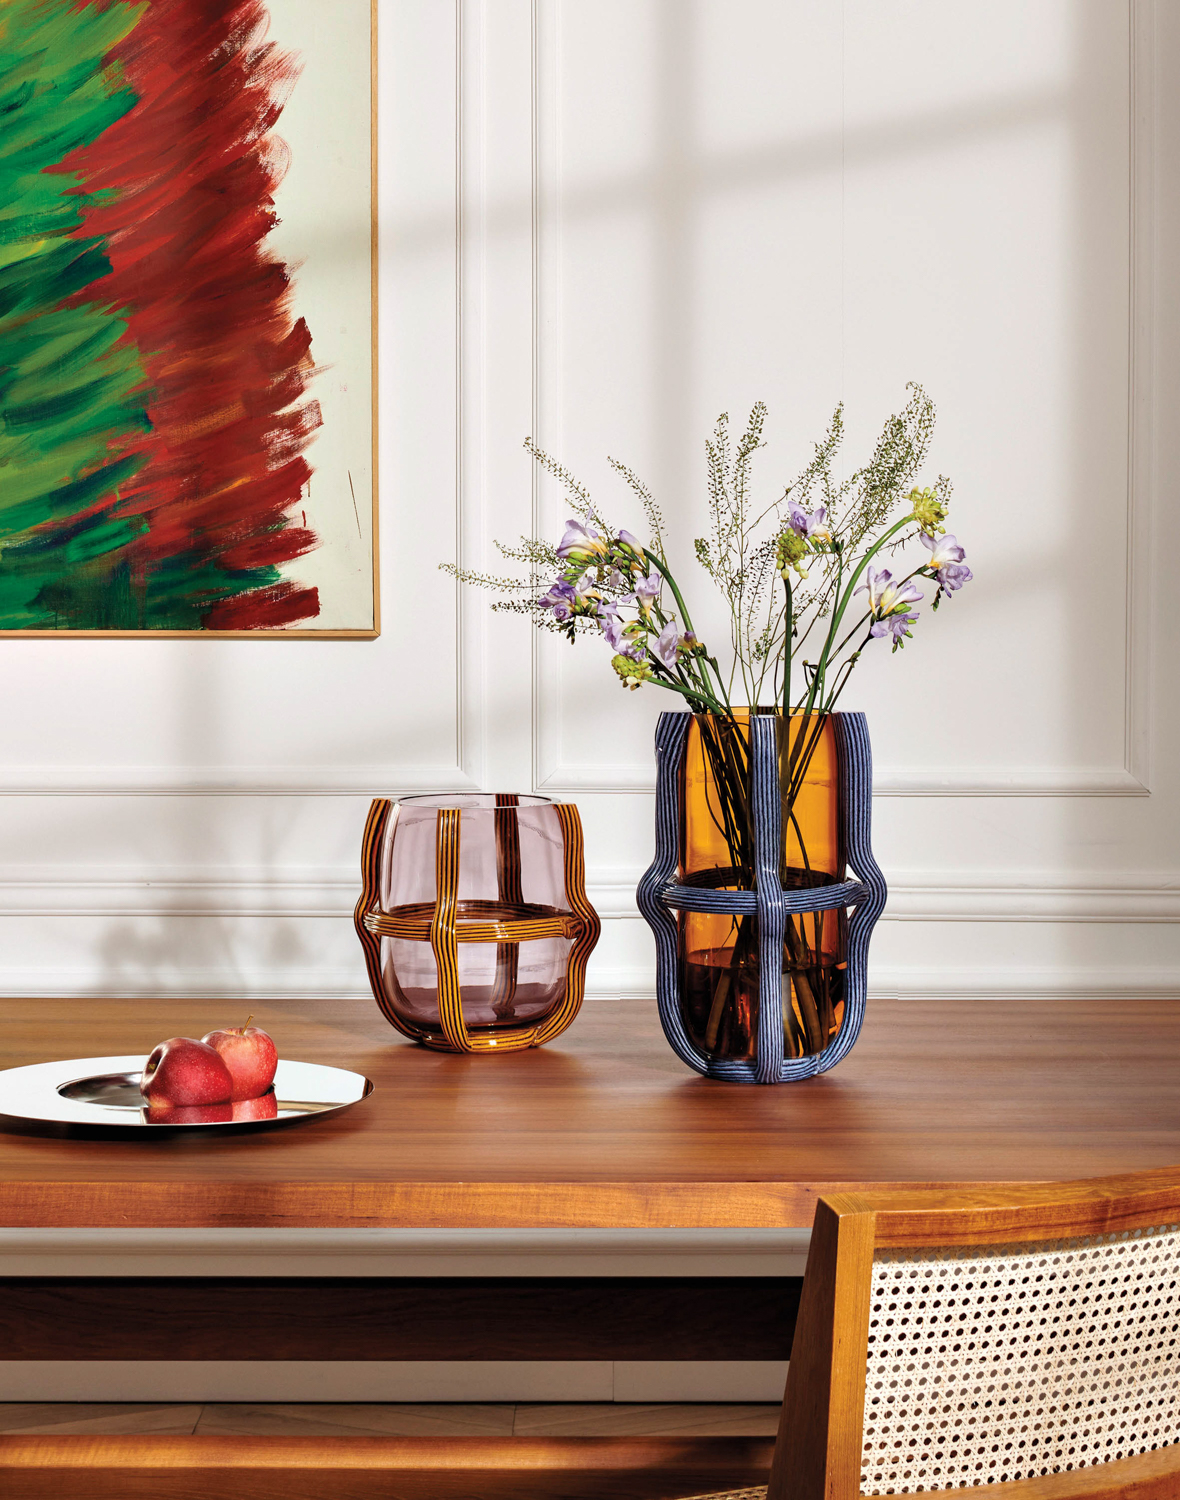 Glass-and-ceramic vases atop a wooden table